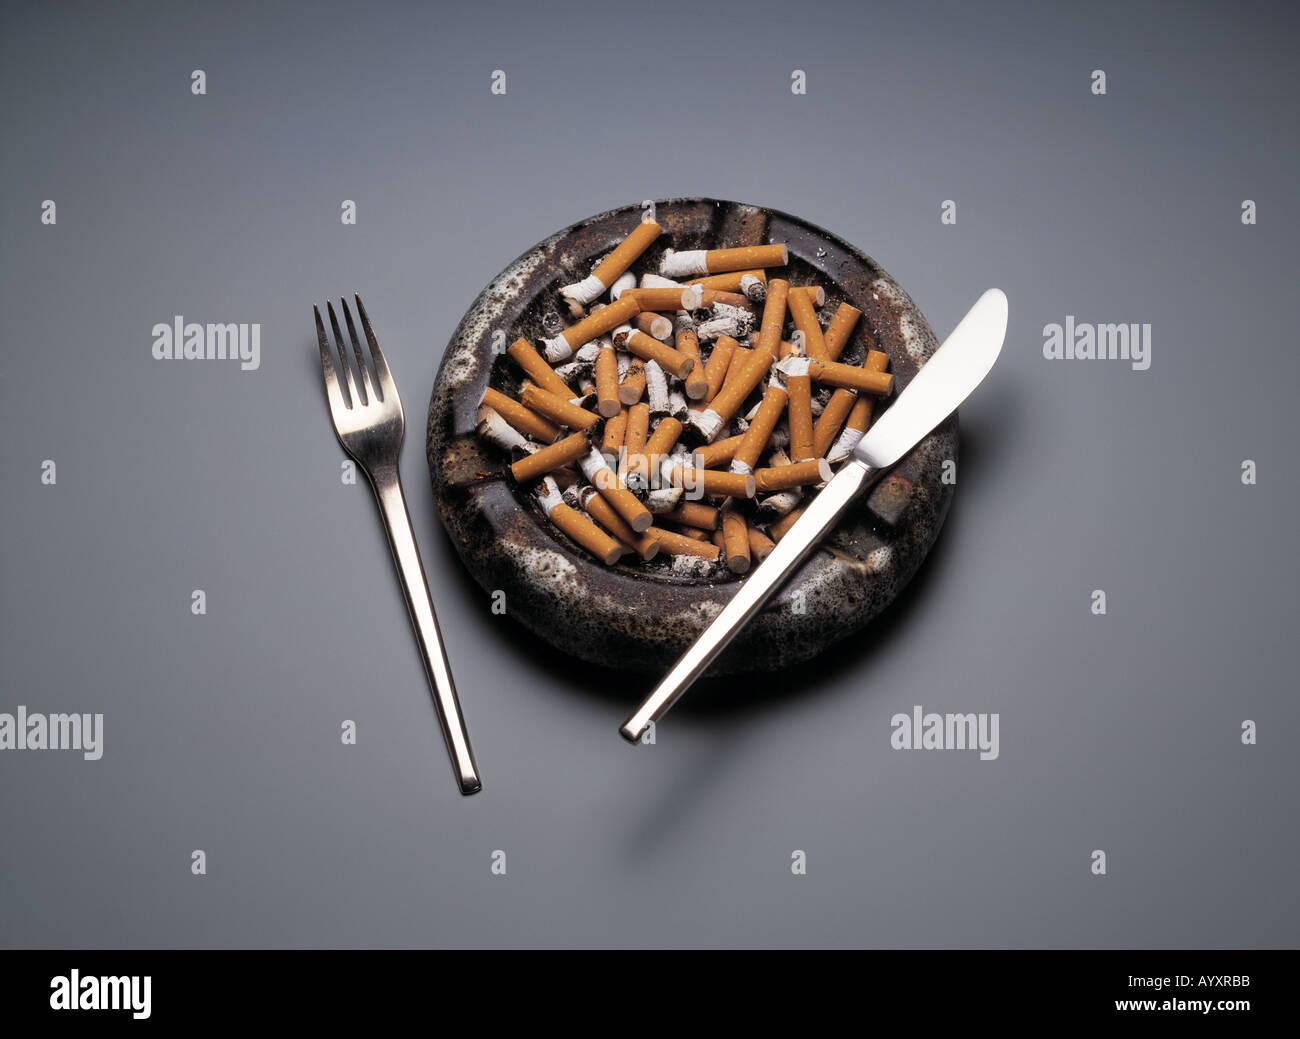 health, full ashtray, overcrowded, butts, stubs, smoking, knife and fork on the ashtray, revulsion, disgust, give up smoking Stock Photo